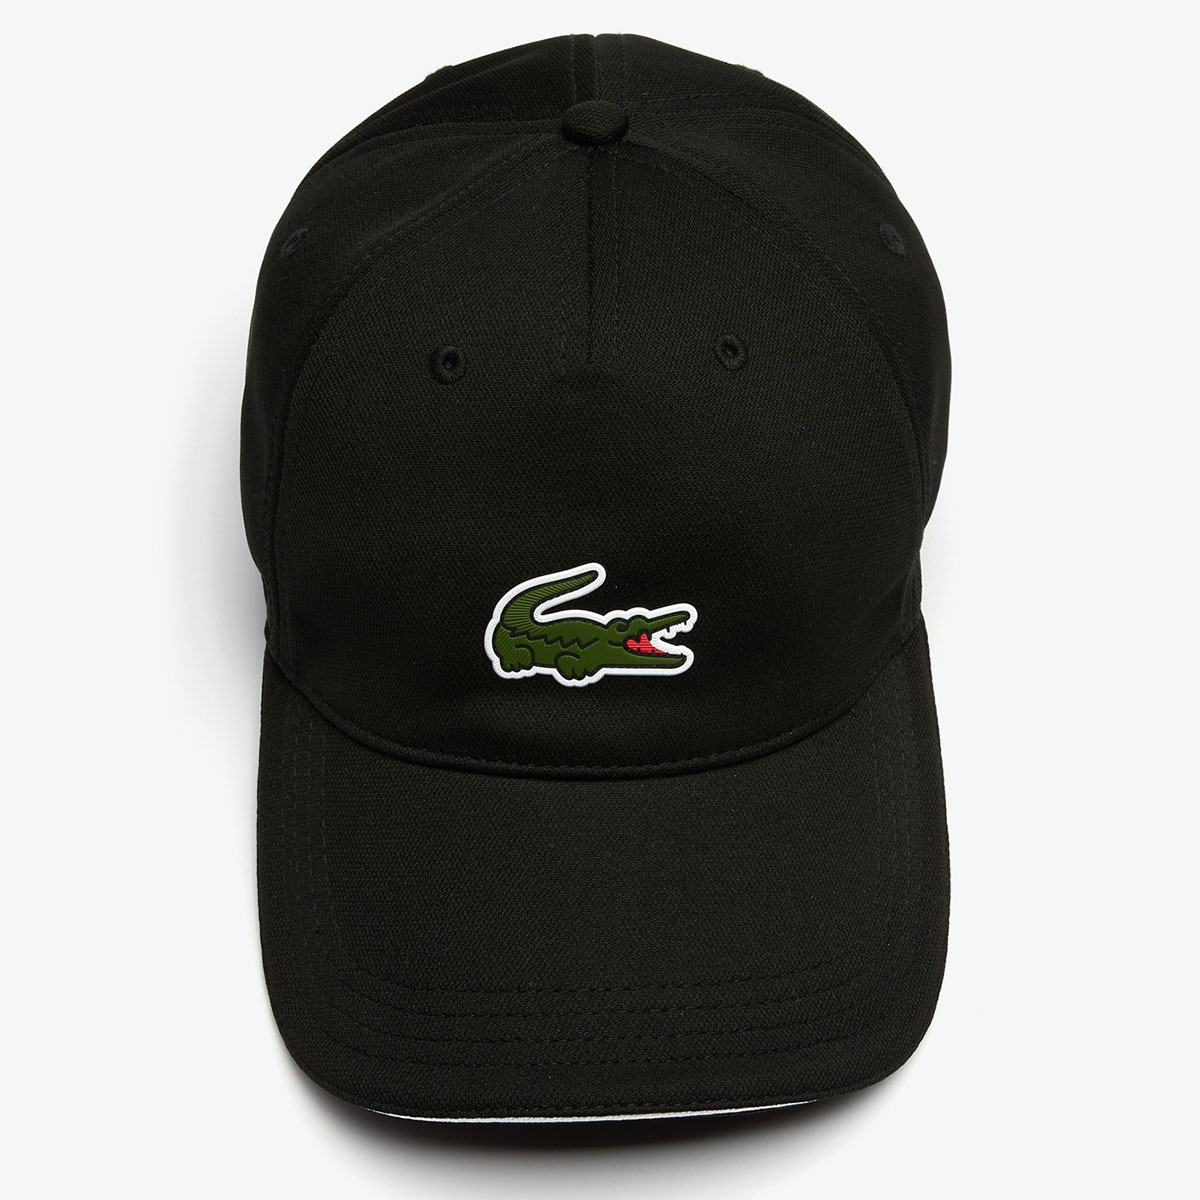 Lacoste SPORT Breathable Piqué Cap from american golf